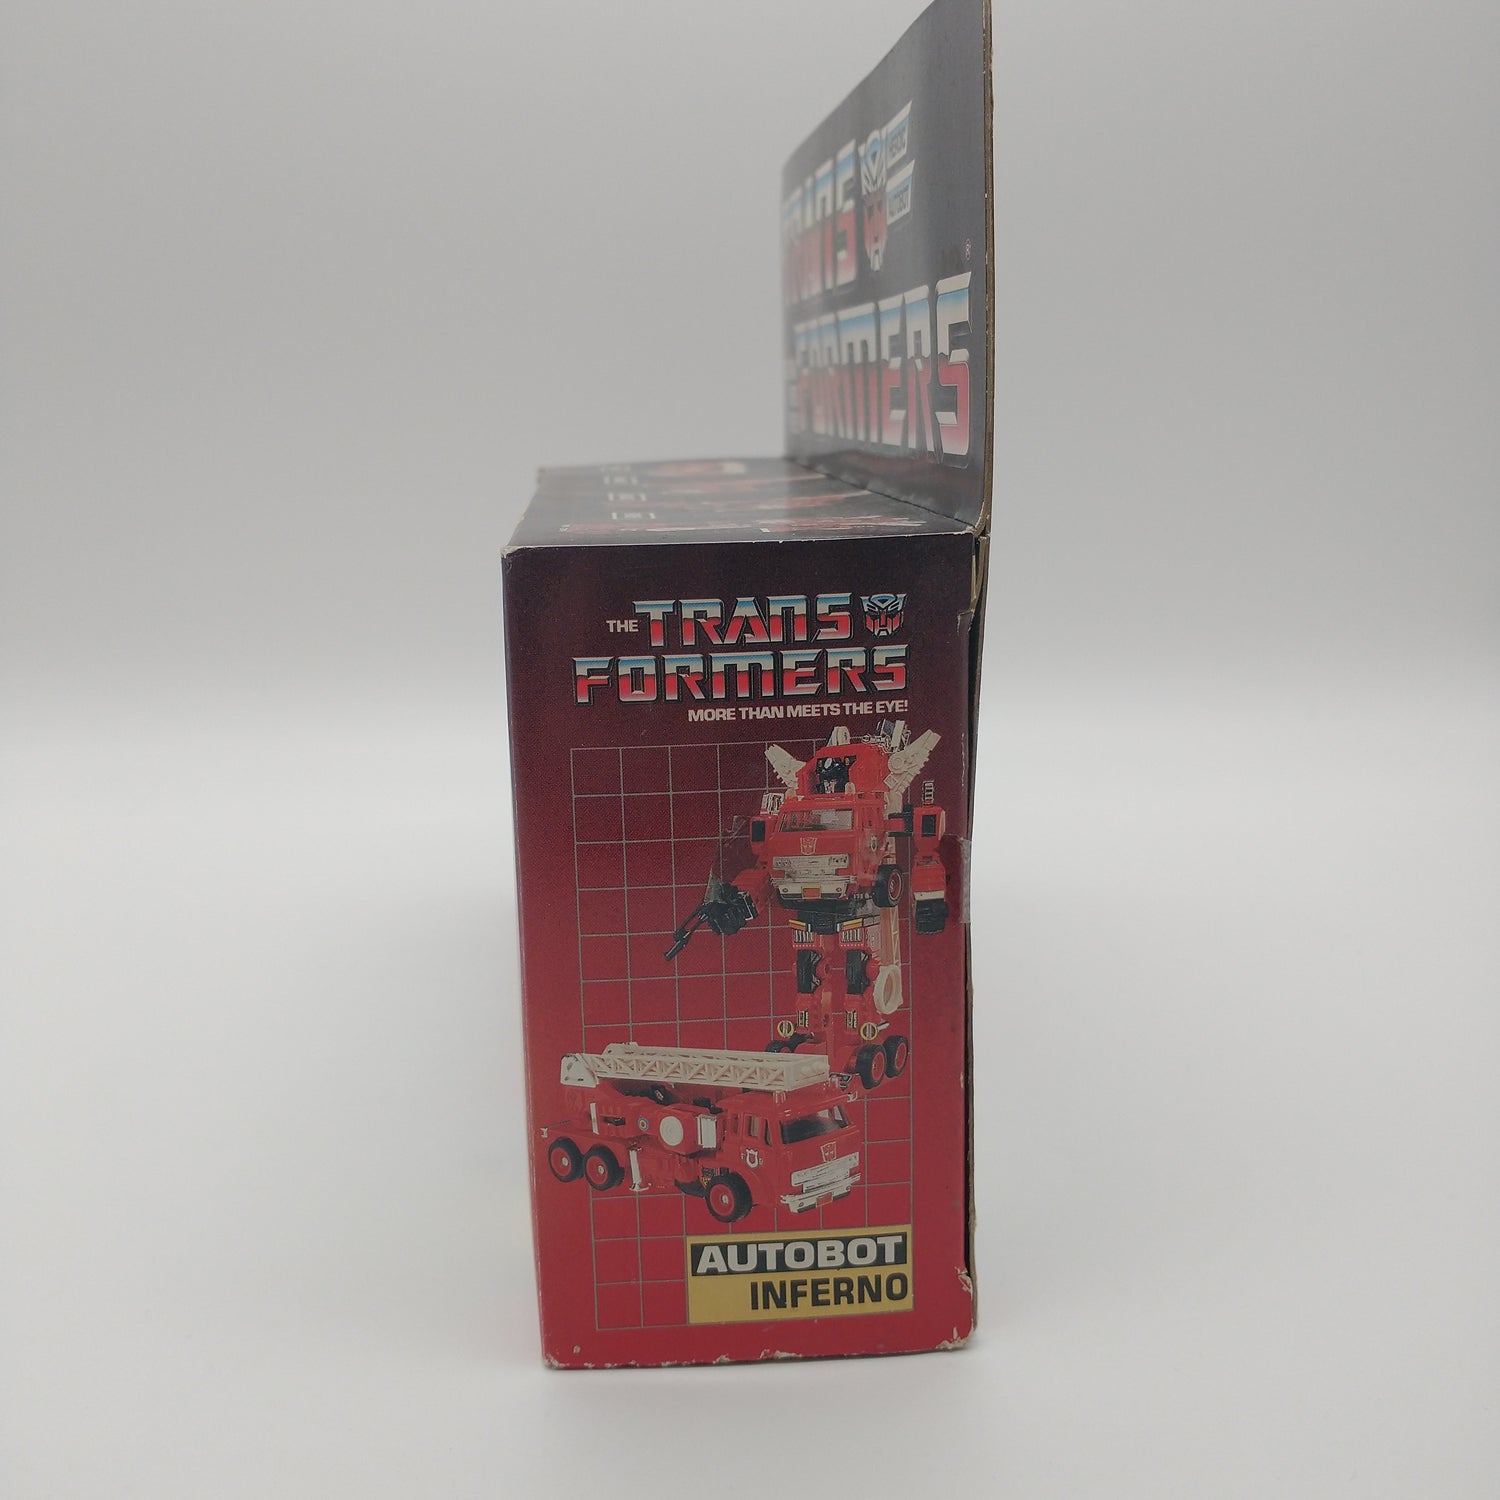 The left side of the box is red with a picture of the figure